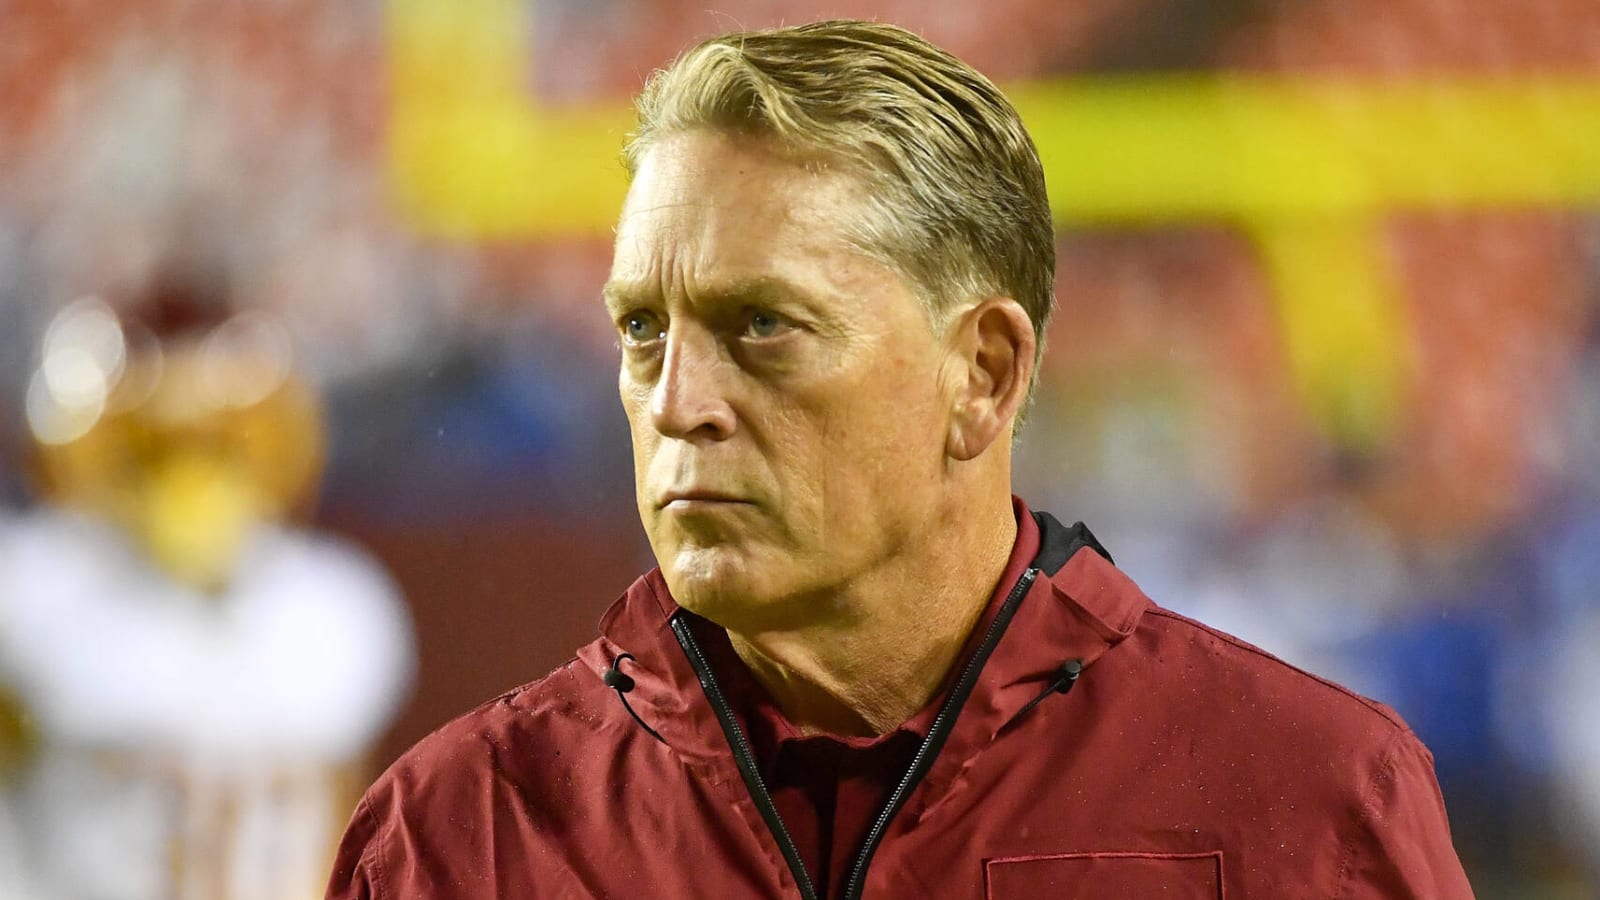 Jack Del Rio deletes Twitter account after fallout from Capital riot comments